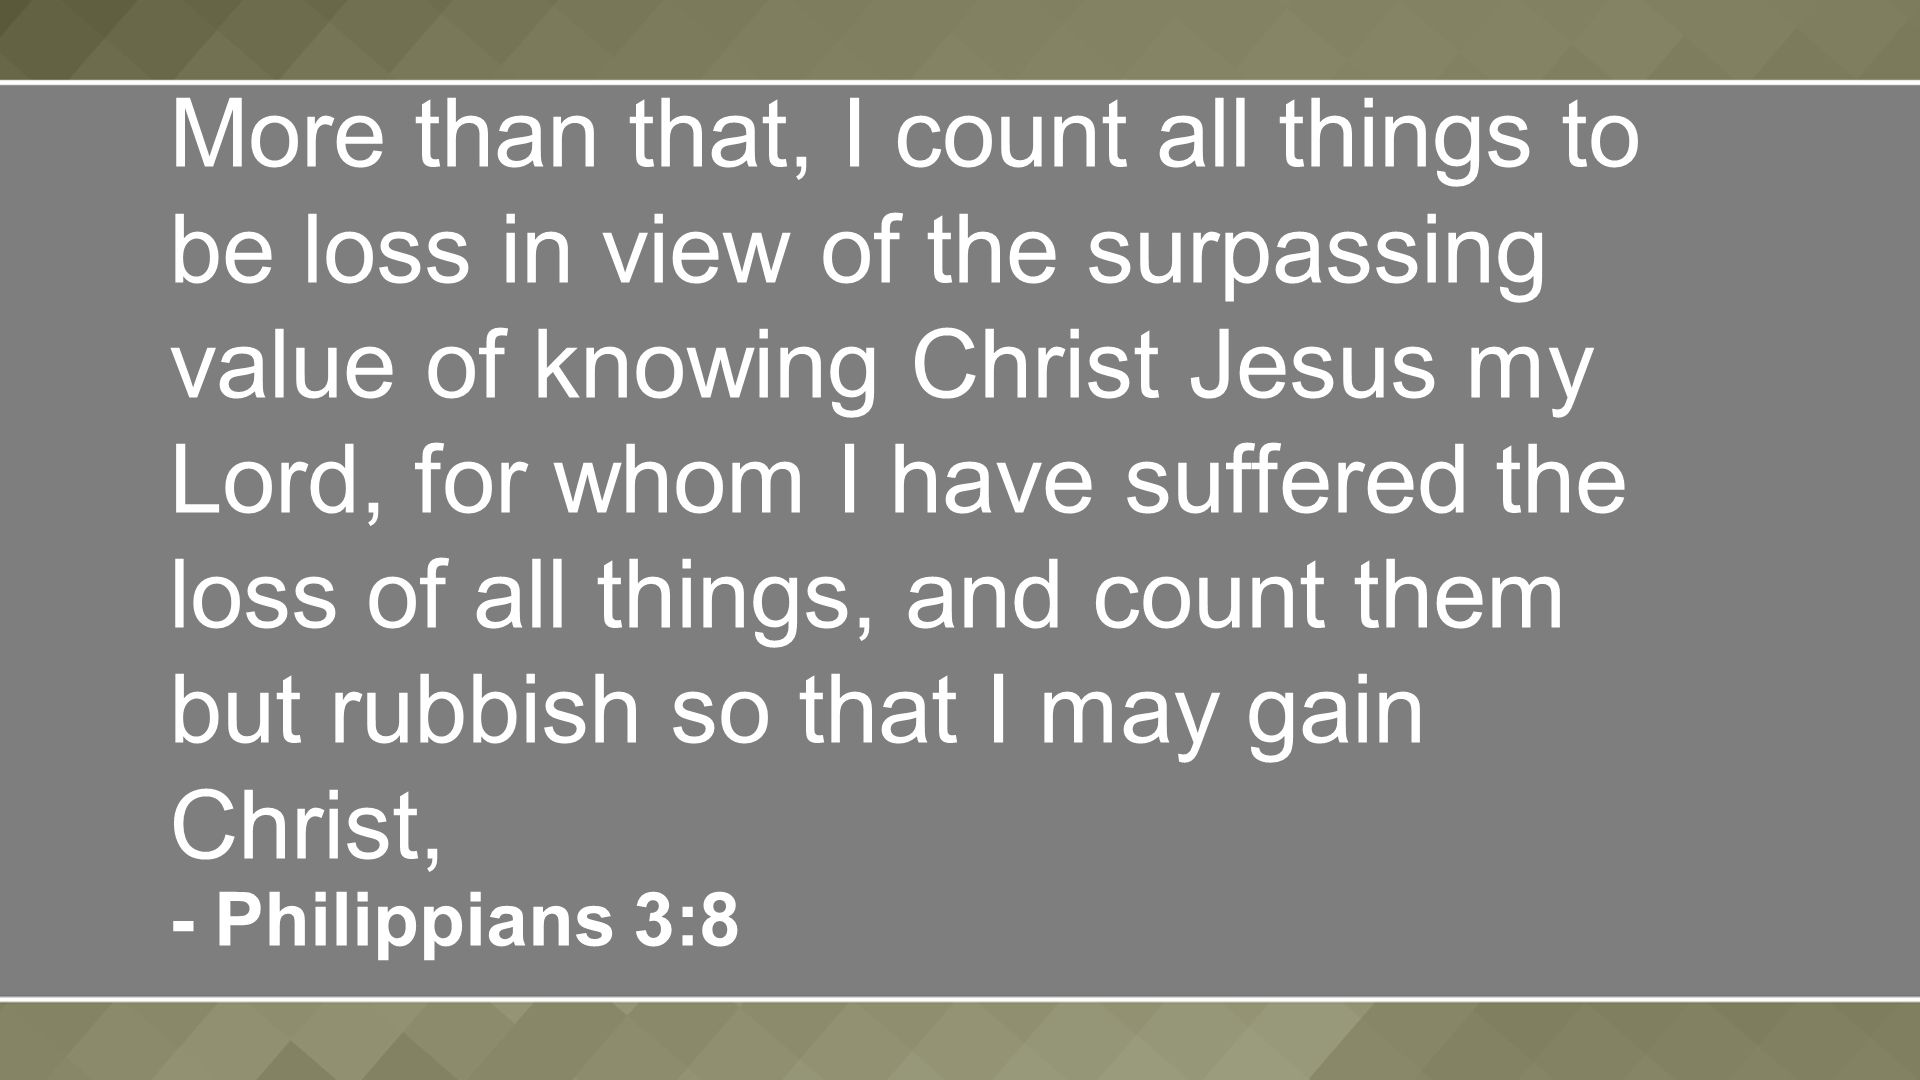 More than that, I count all things to be loss in view of the surpassing value of knowing Christ Jesus my Lord, for whom I have suffered the loss of all things, and count them but rubbish so that I may gain Christ, - Philippians 3:8